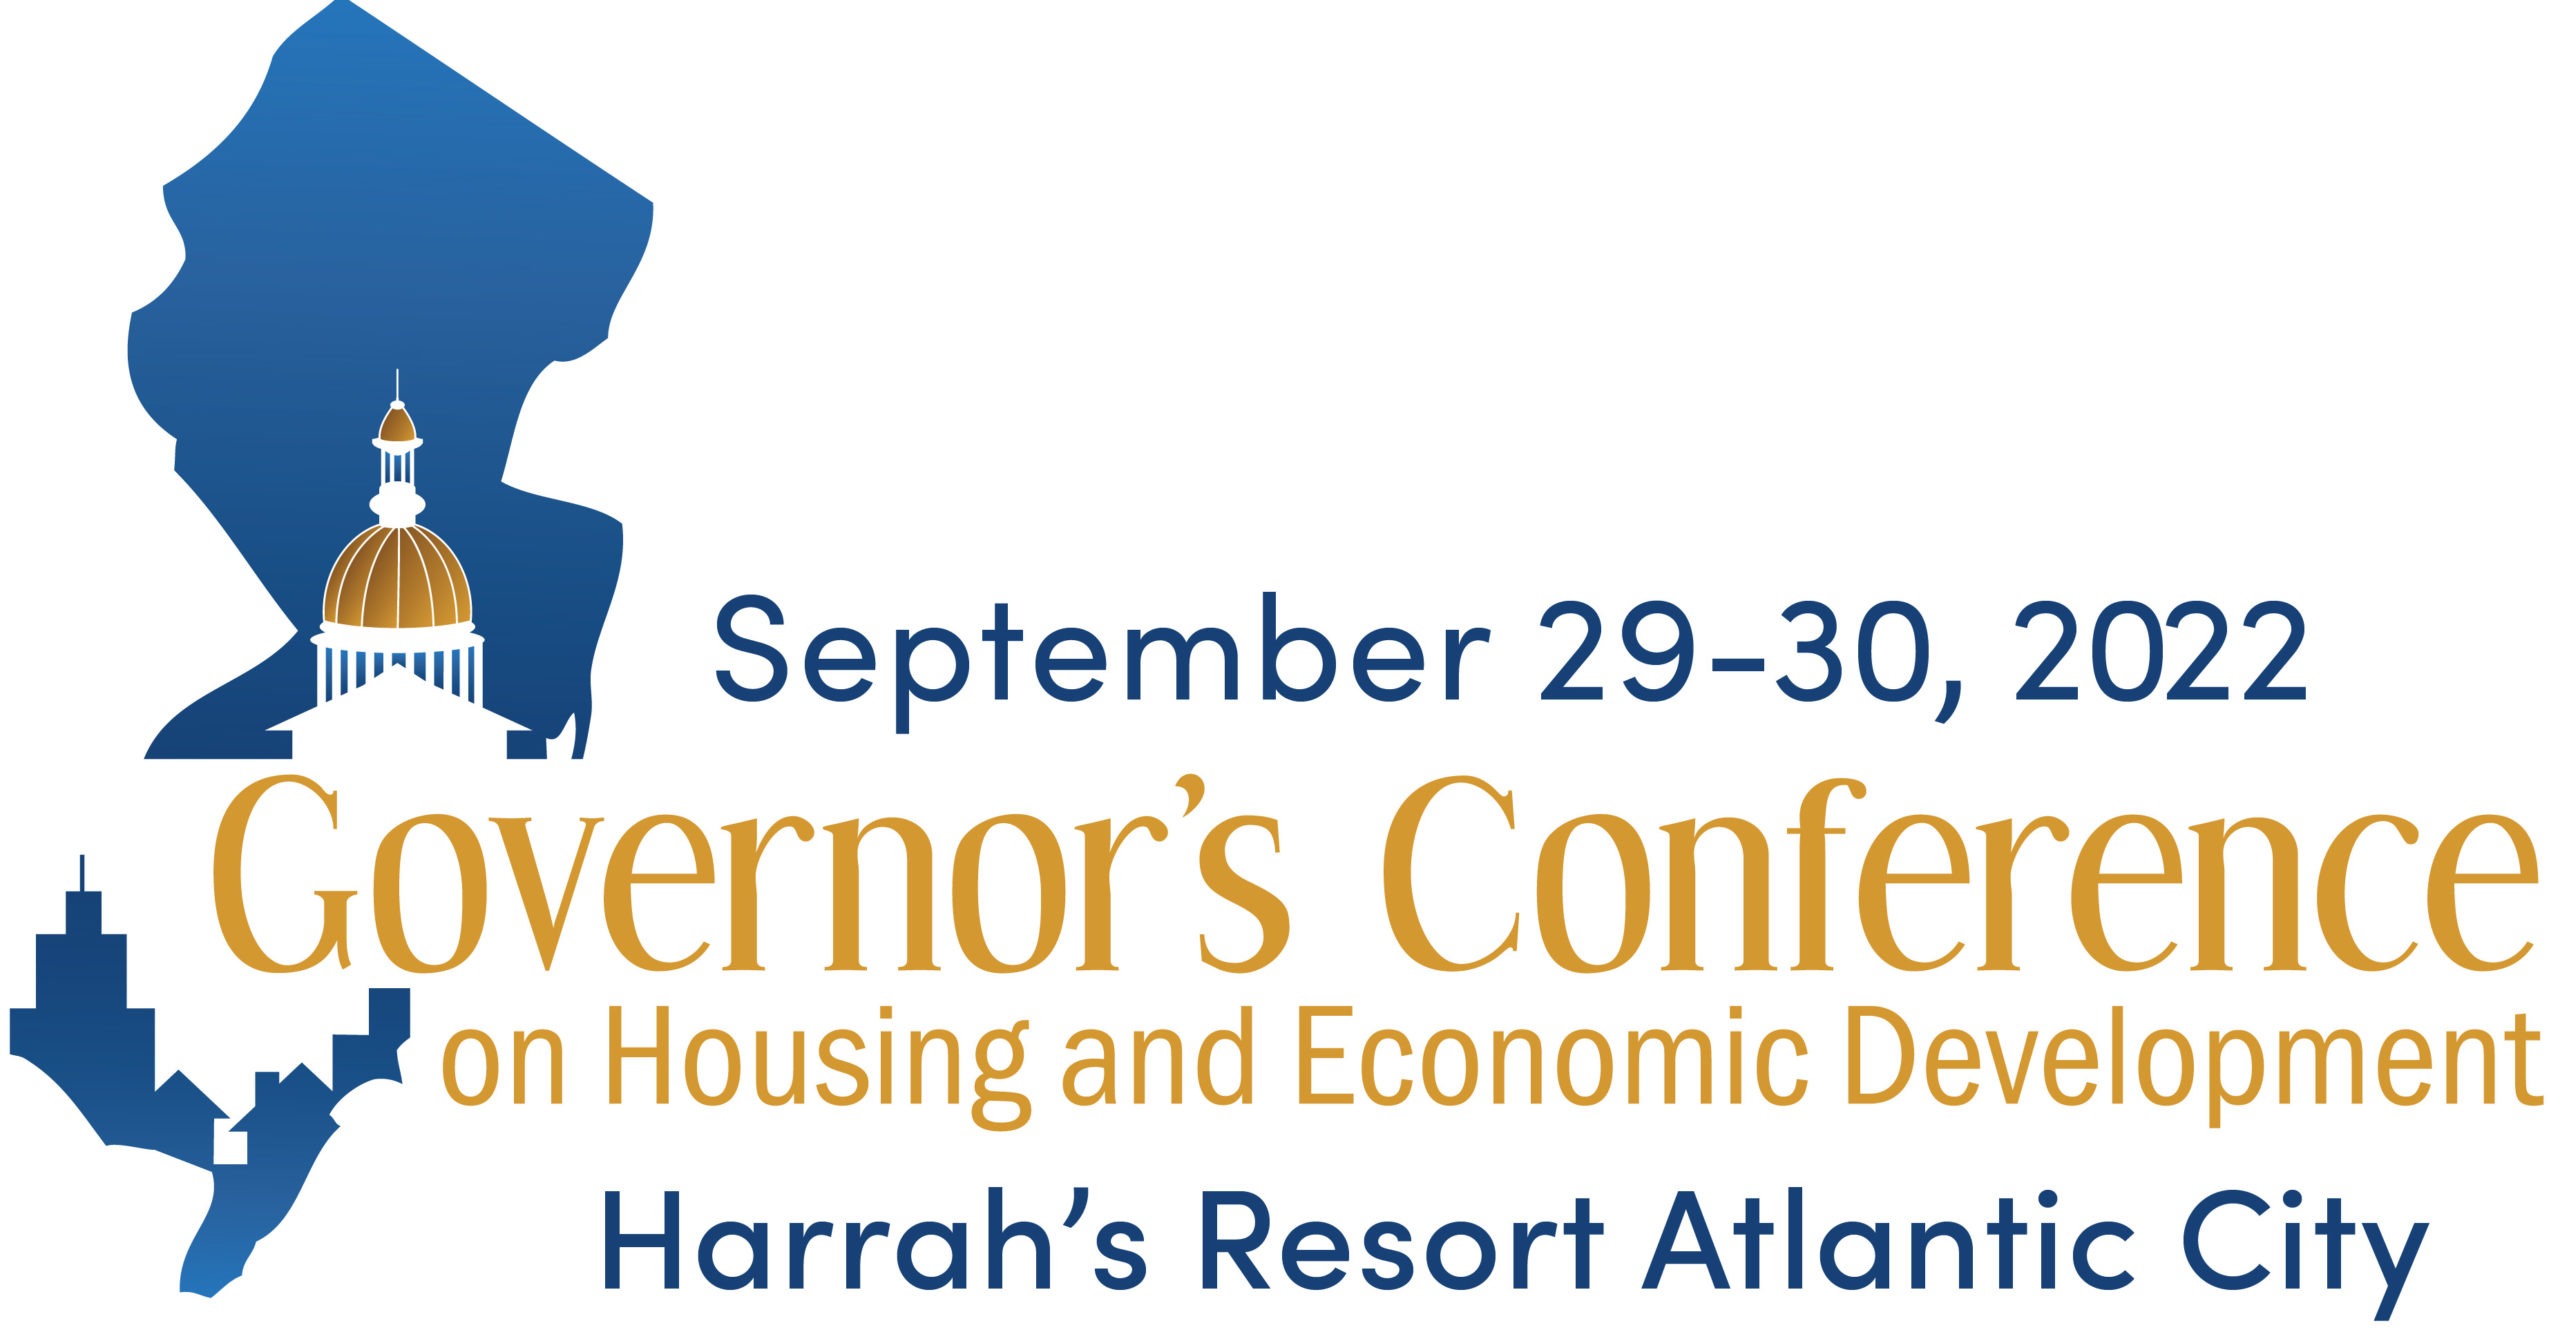 2022 Governor's Conference on Housing and Economic Development Logo - at Harrah's Resort in Atlantic City, September 29 and 30, 2022